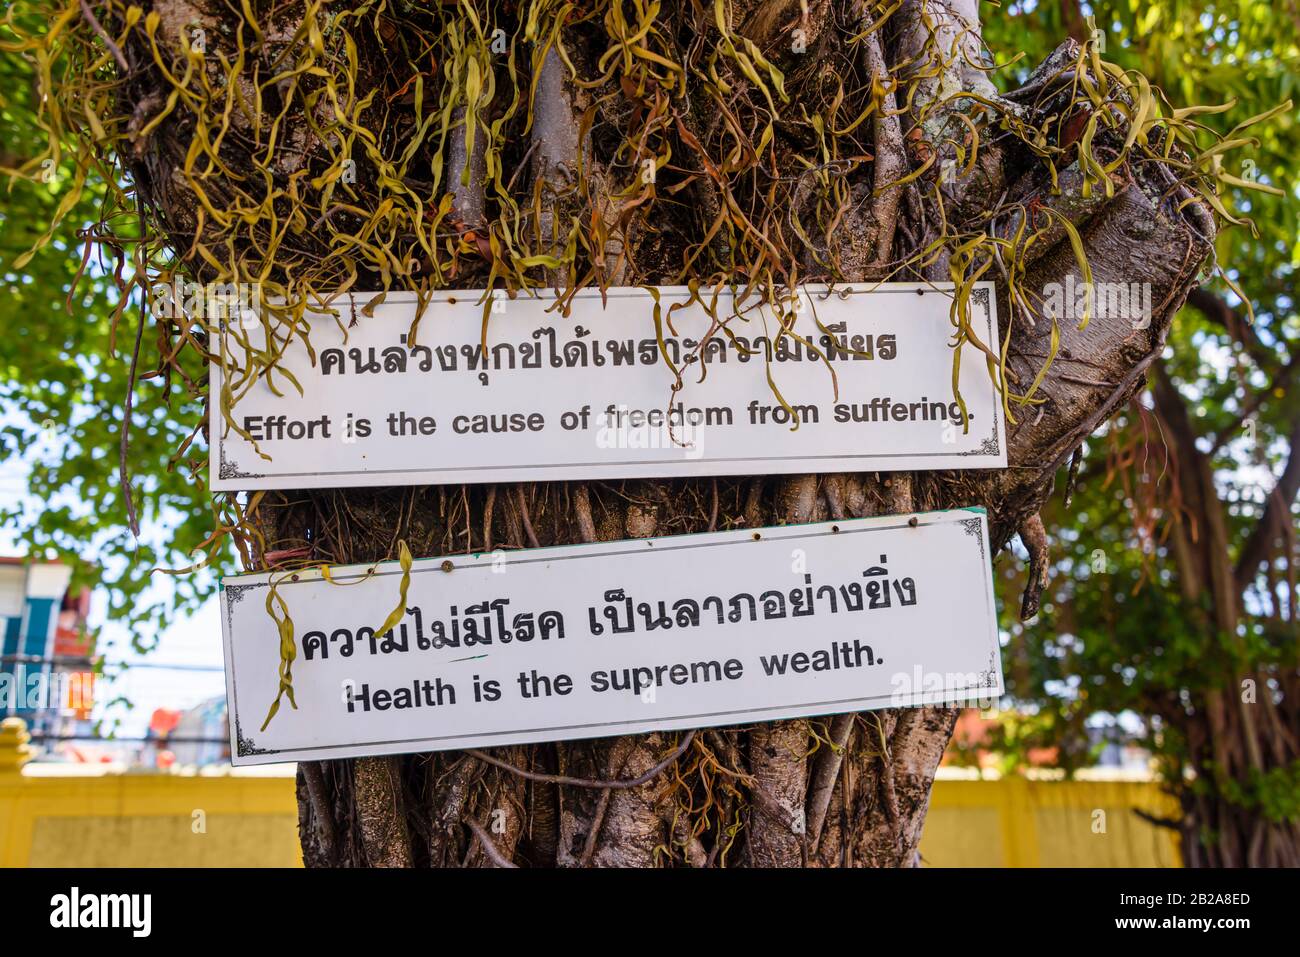 Motivational signs in Thai and English saying 'Effort is the cause of freedom from suffering' and 'Health is the spreme wealth', Thailand Stock Photo